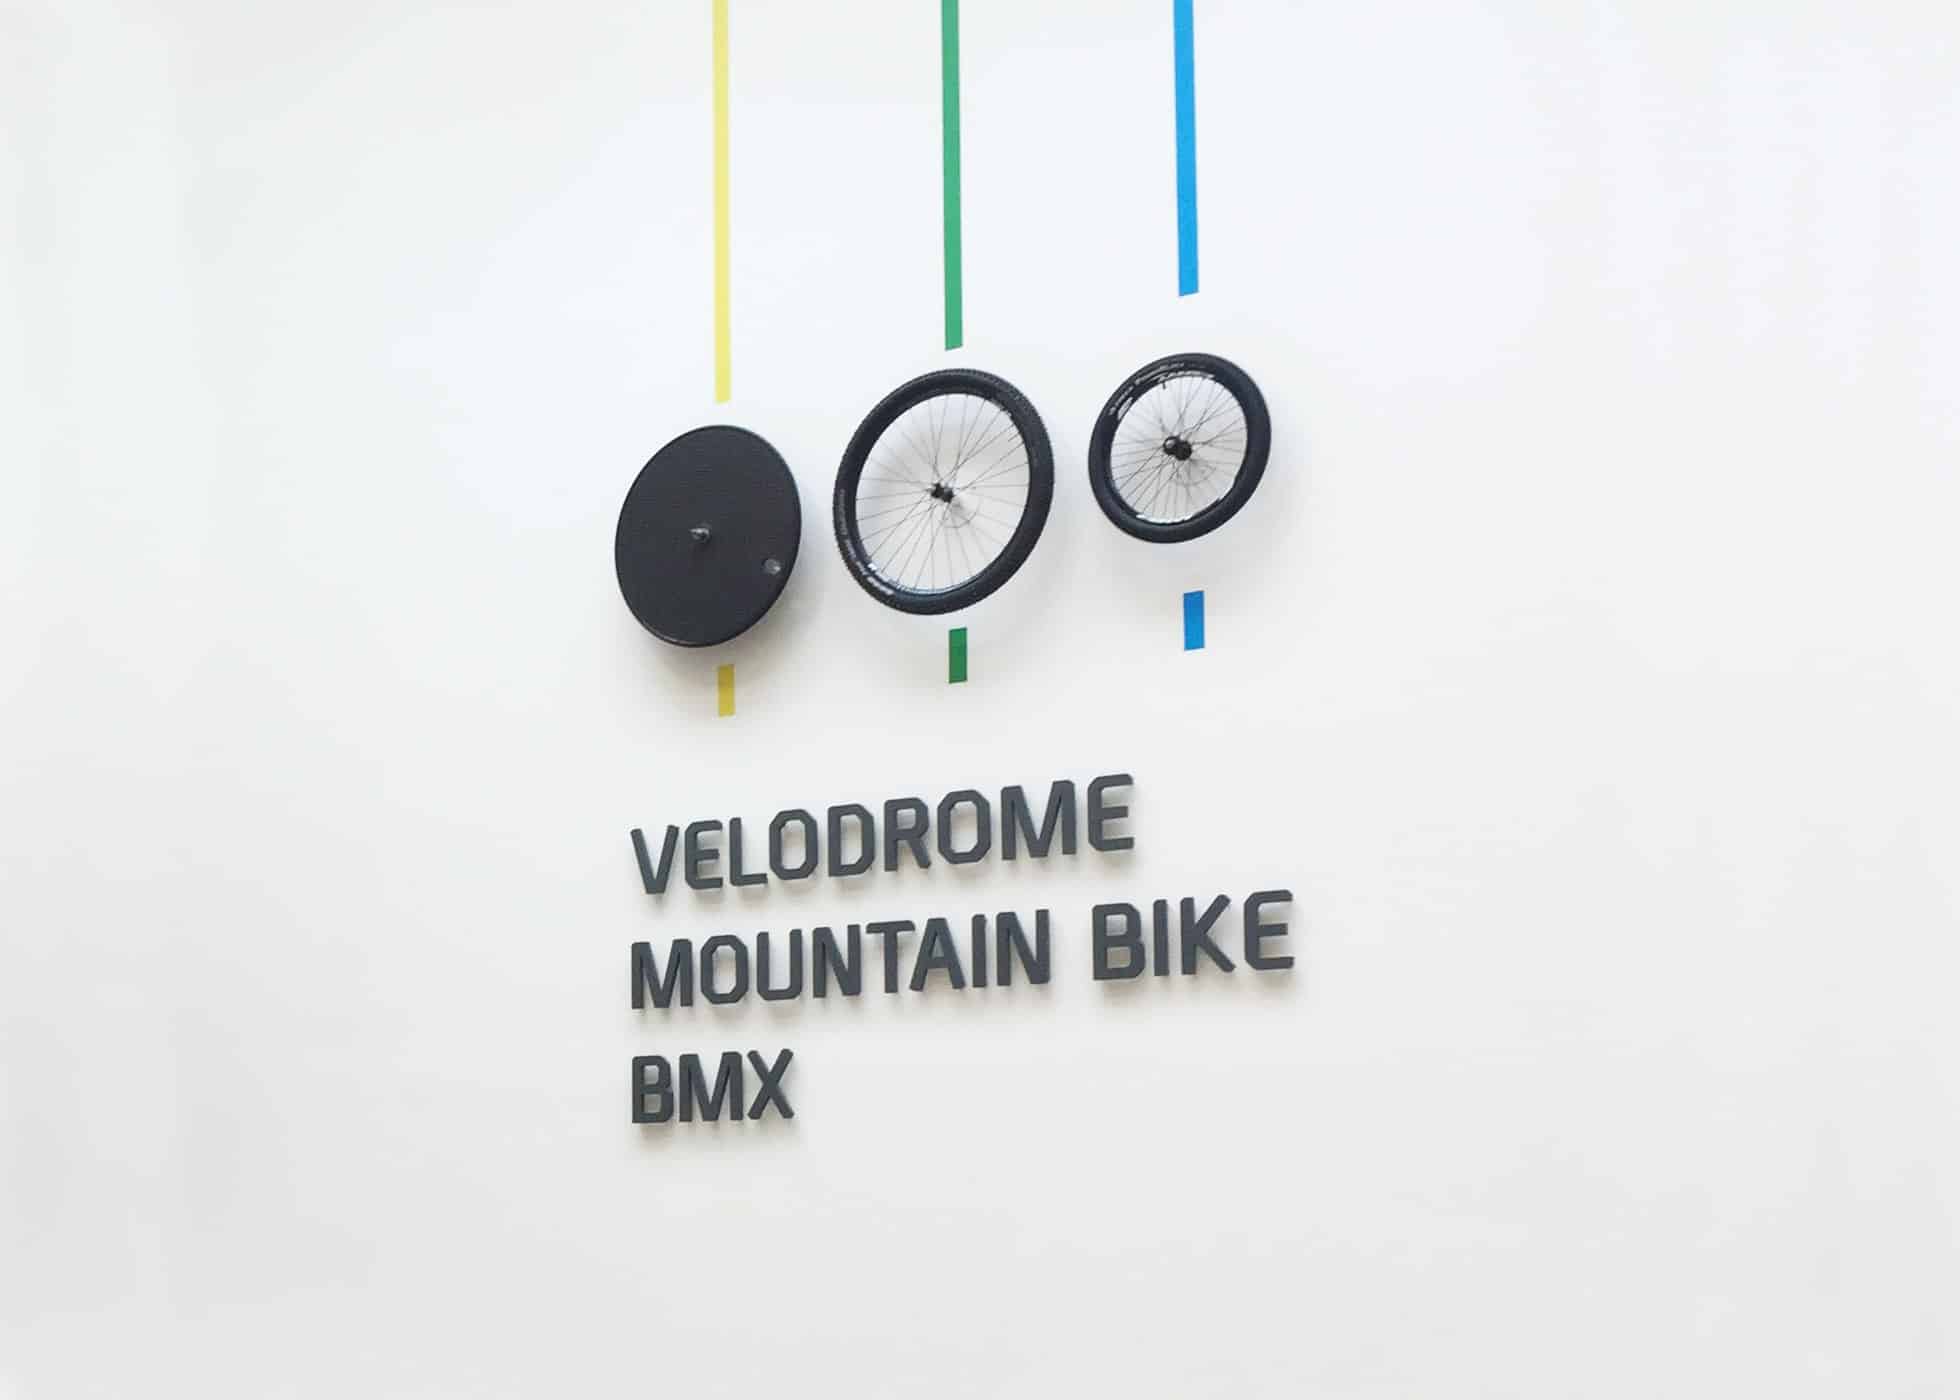 Velodrome Sign With Mountain Bike & BMX Wheels On Wall